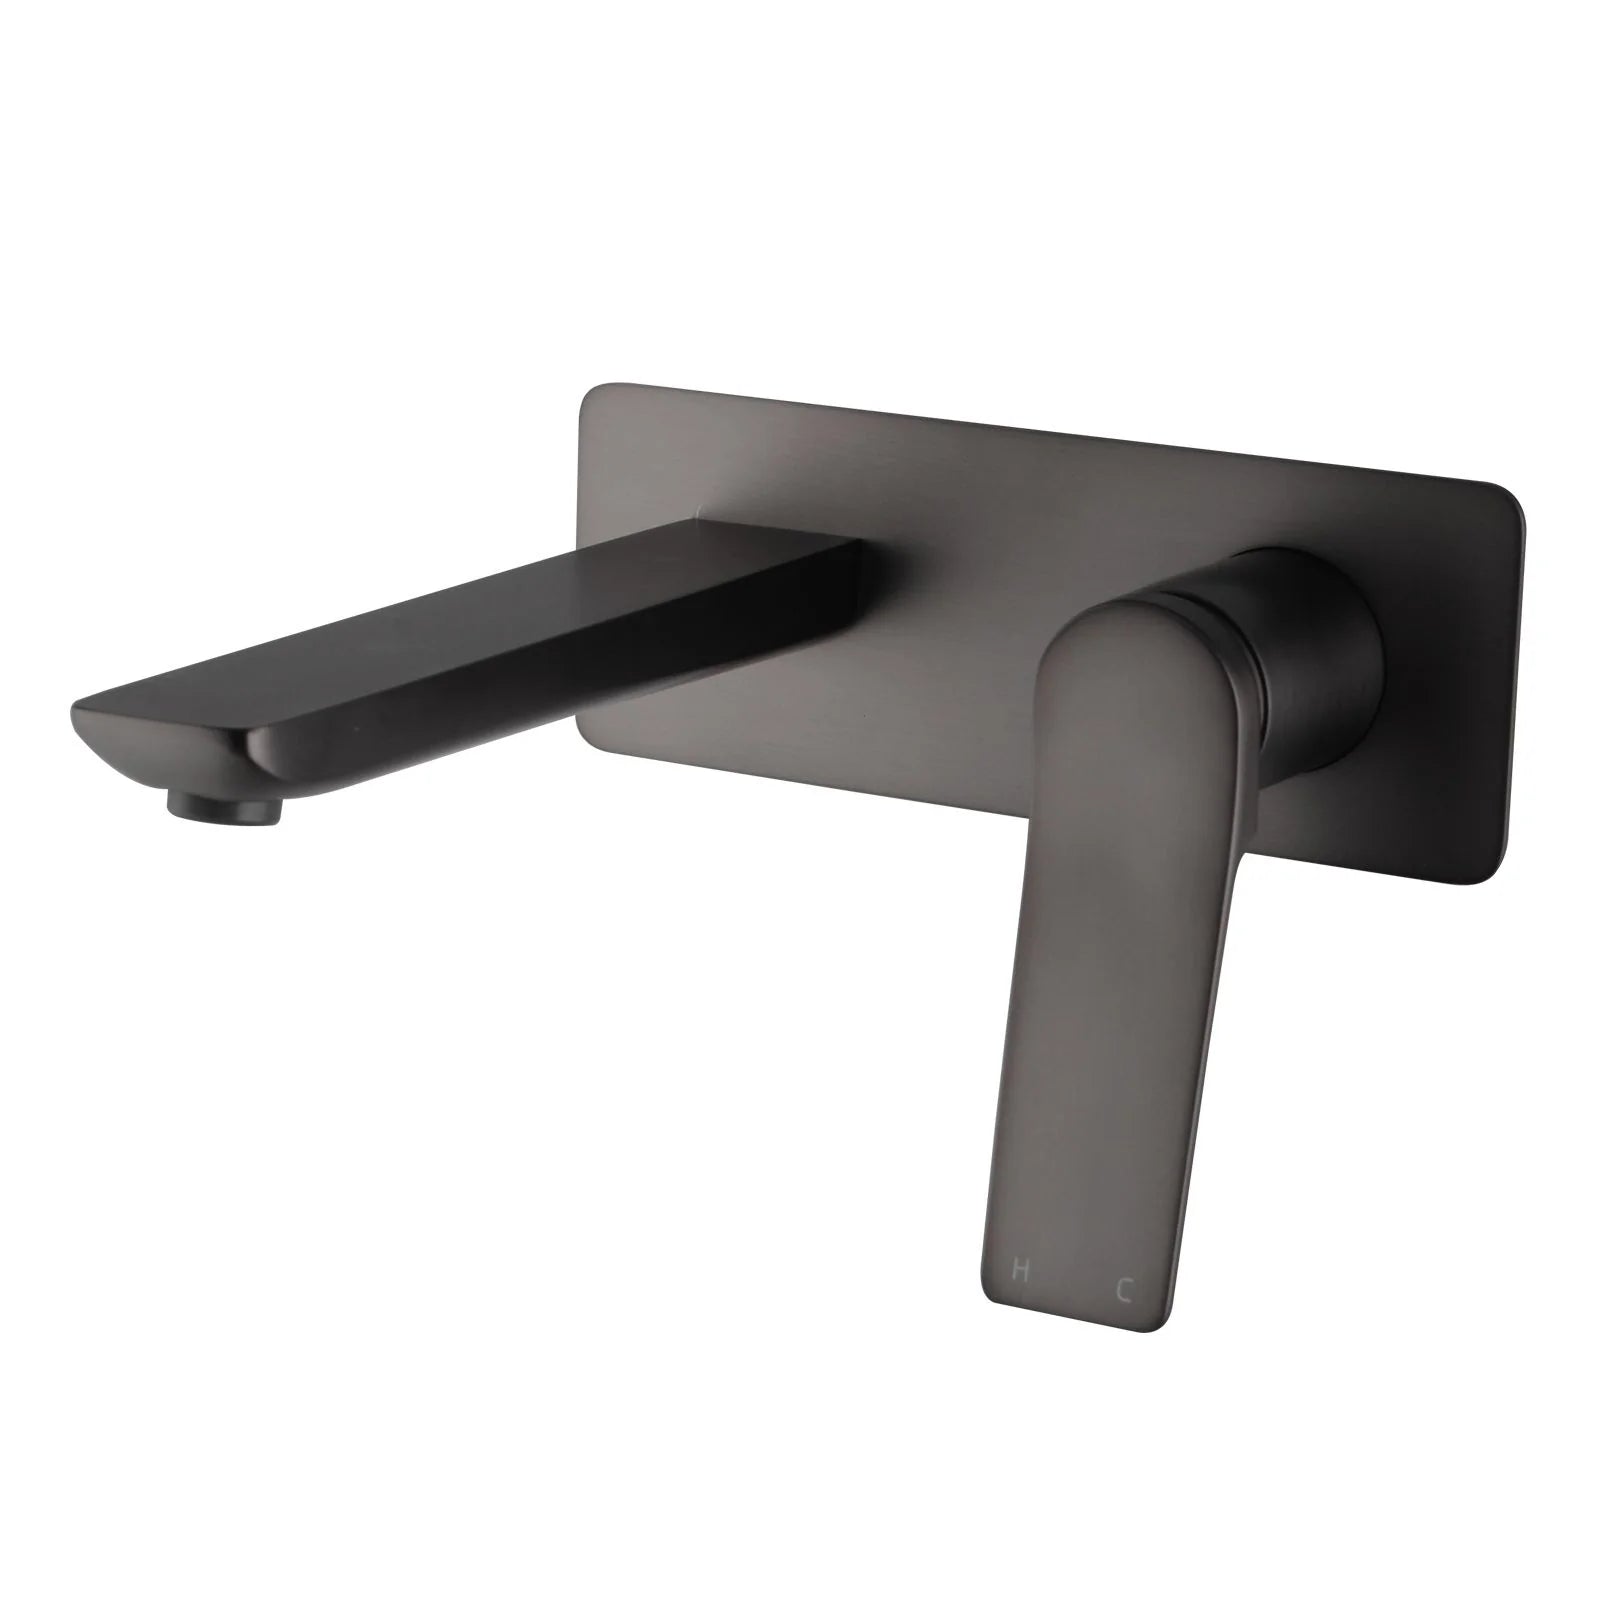 Refined brushed gun metal wall mixer with spout, highlighting the stylish Rushy Square design-BUGM0153-2-EX.BM